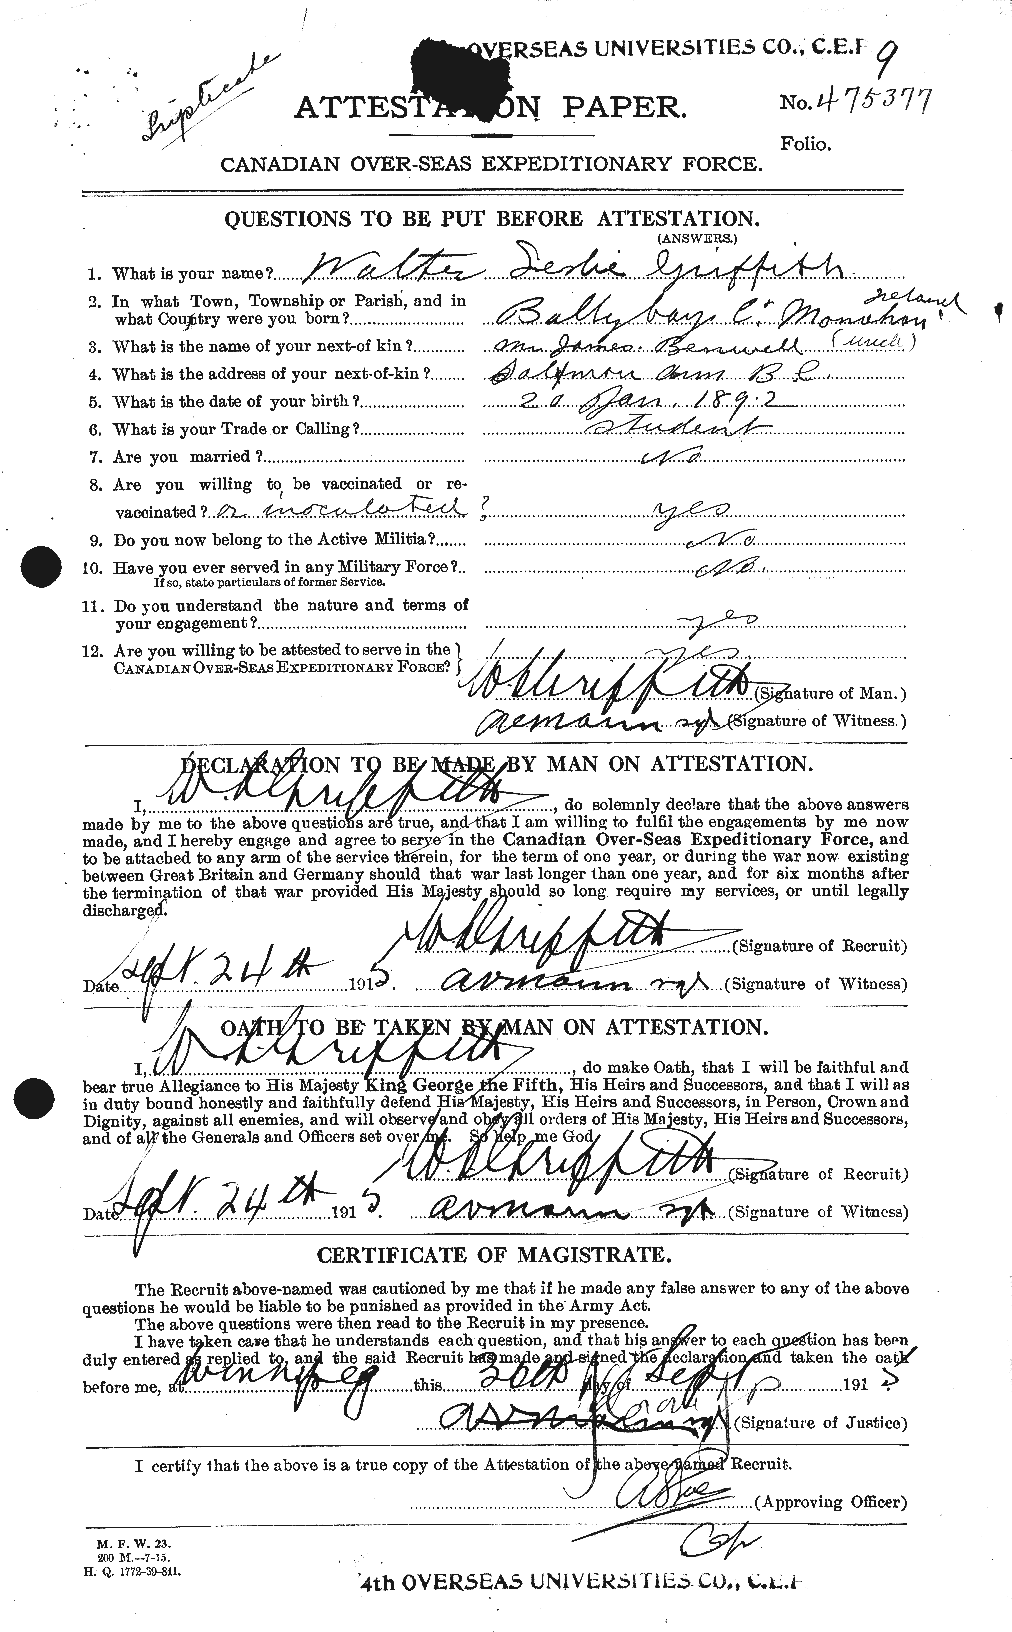 Personnel Records of the First World War - CEF 366594a